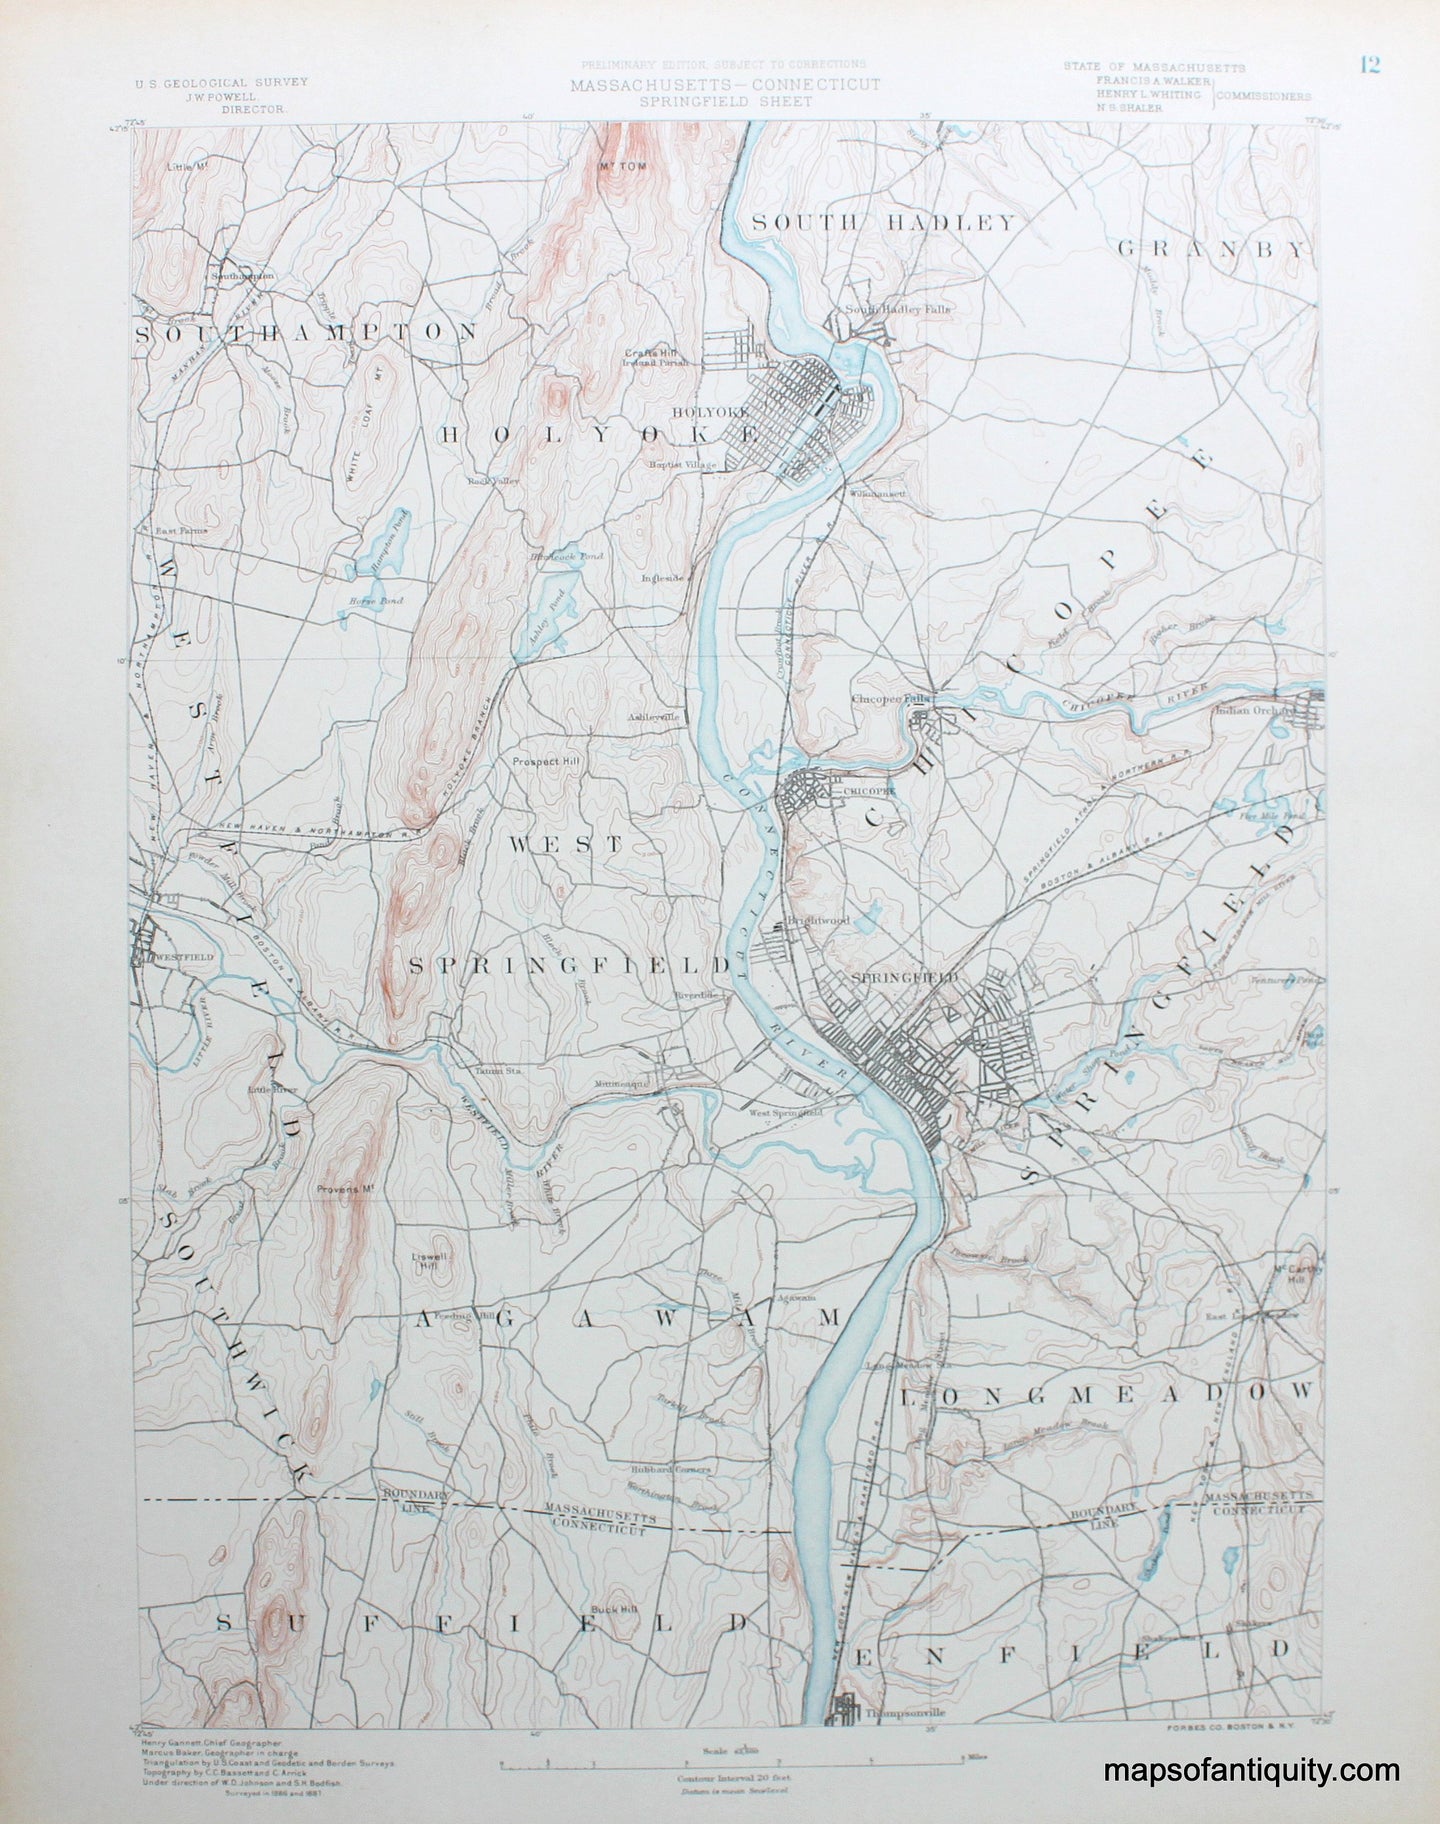 Topographical-Map-MA/CT-Springfield-sheet-antique-topo-map-United-States-Massachusetts-General-1890-USGS-Maps-Of-Antiquity